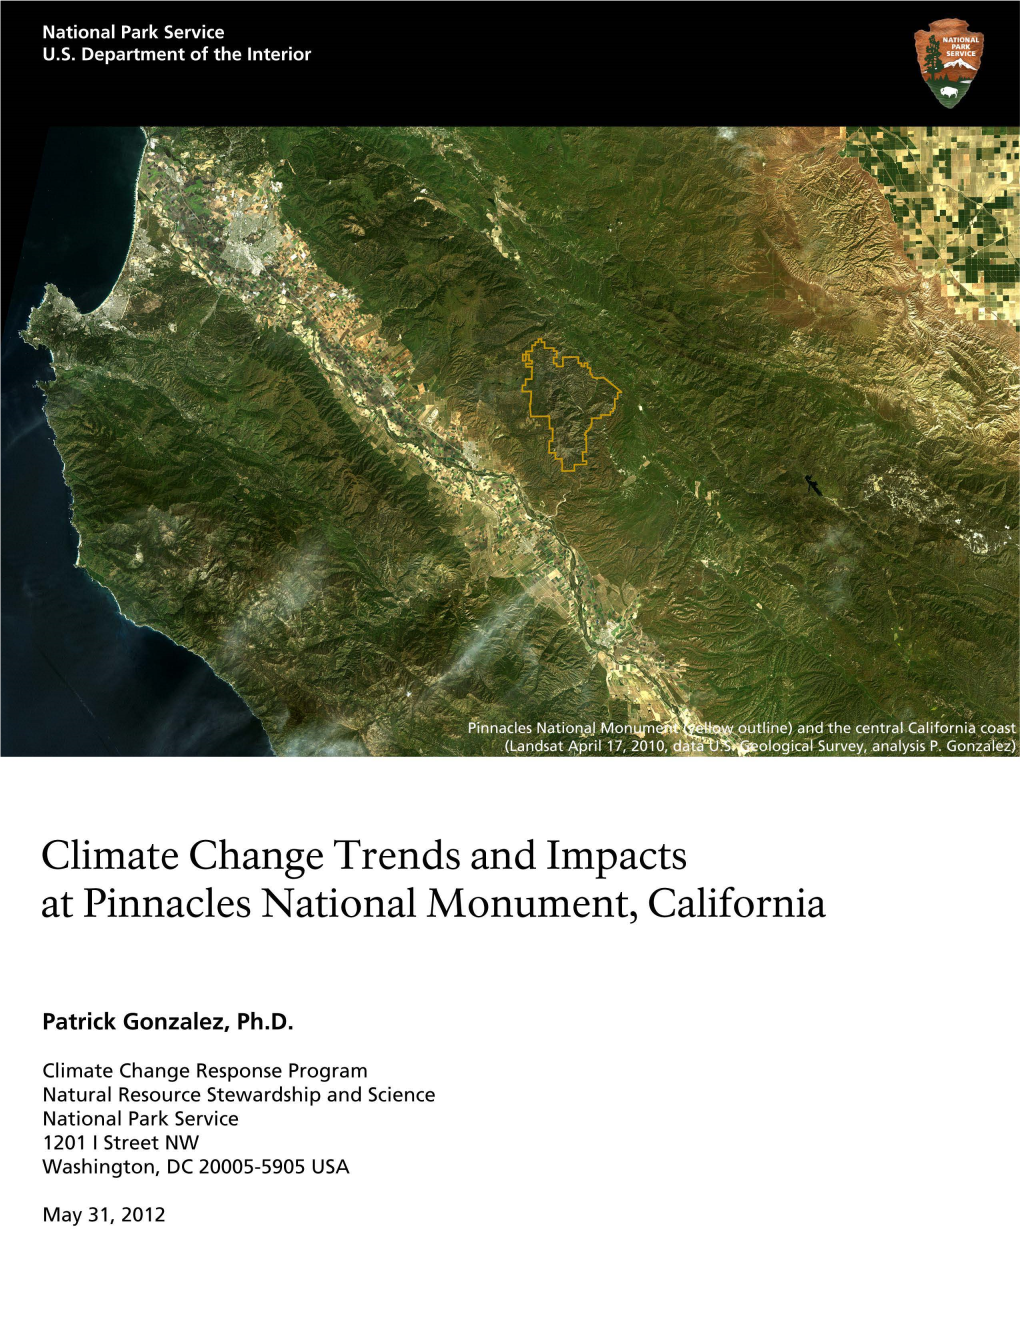 Climate Change Trends and Impacts at Pinnacles National Monument, California